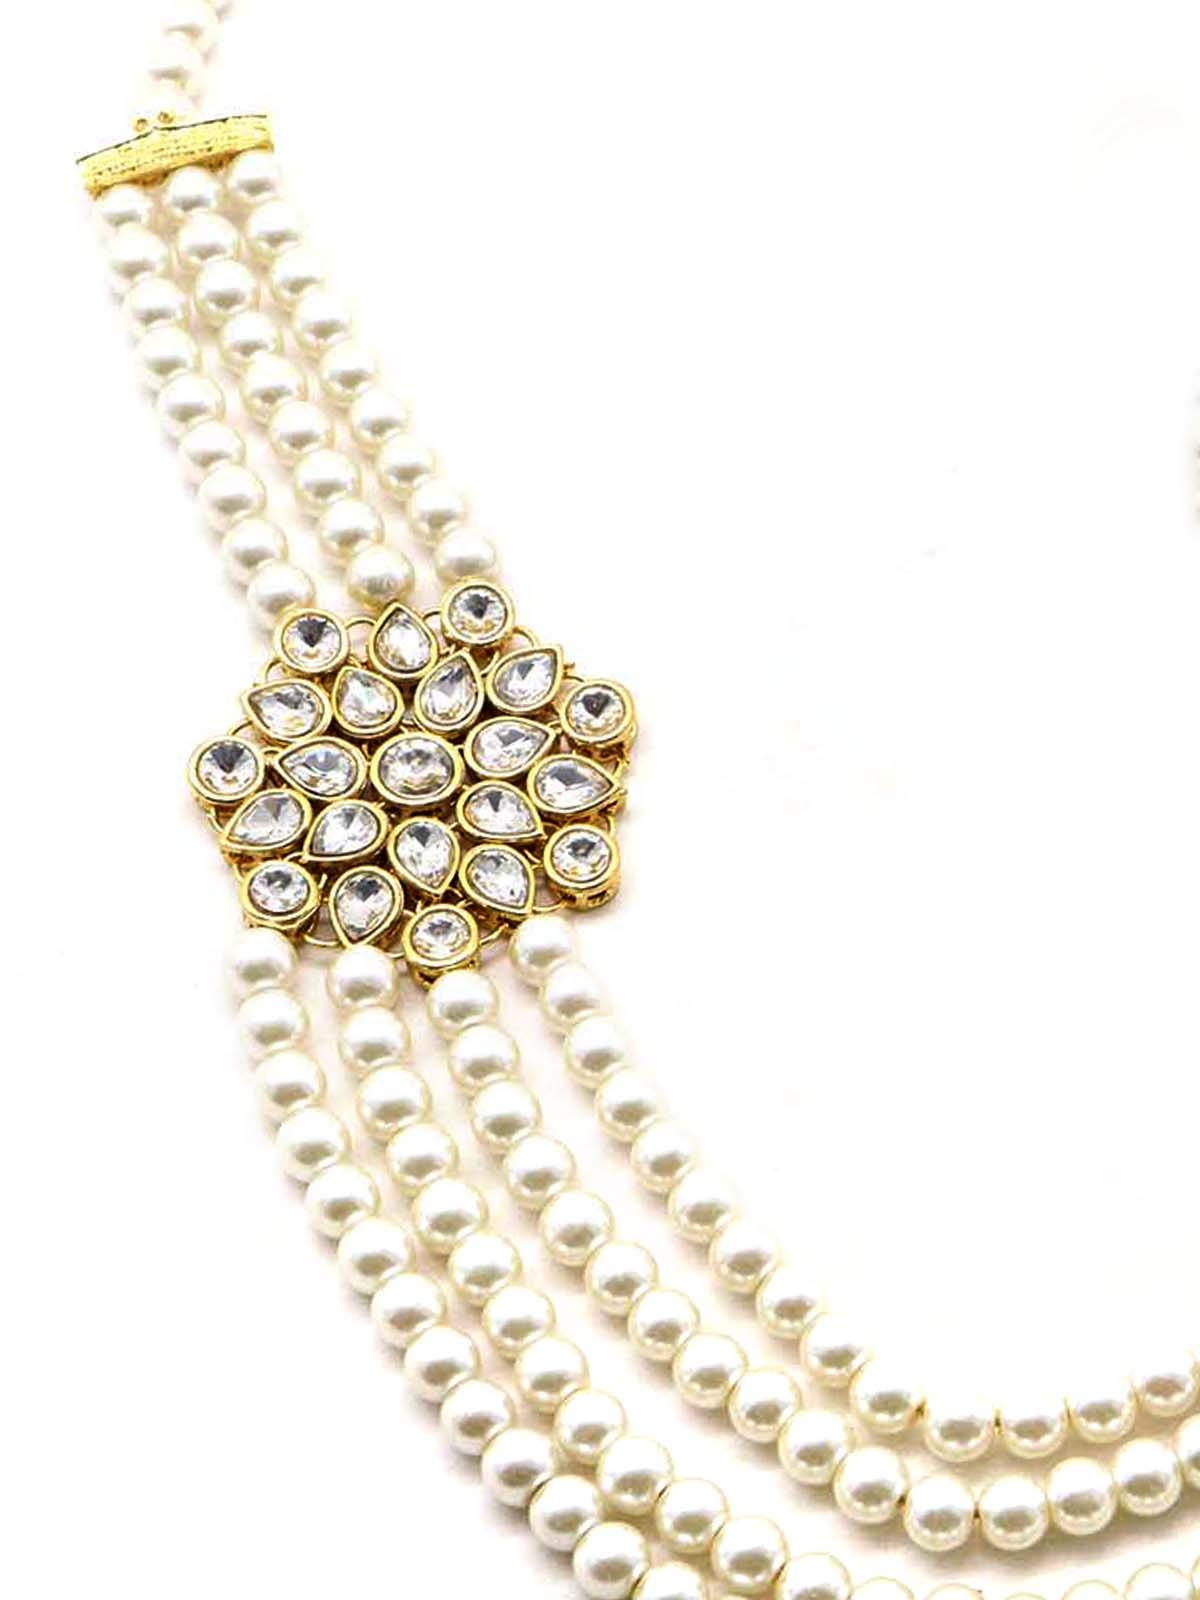 Women's Regular Attractive Faux Pearl Necklace With Earrings! - Odette